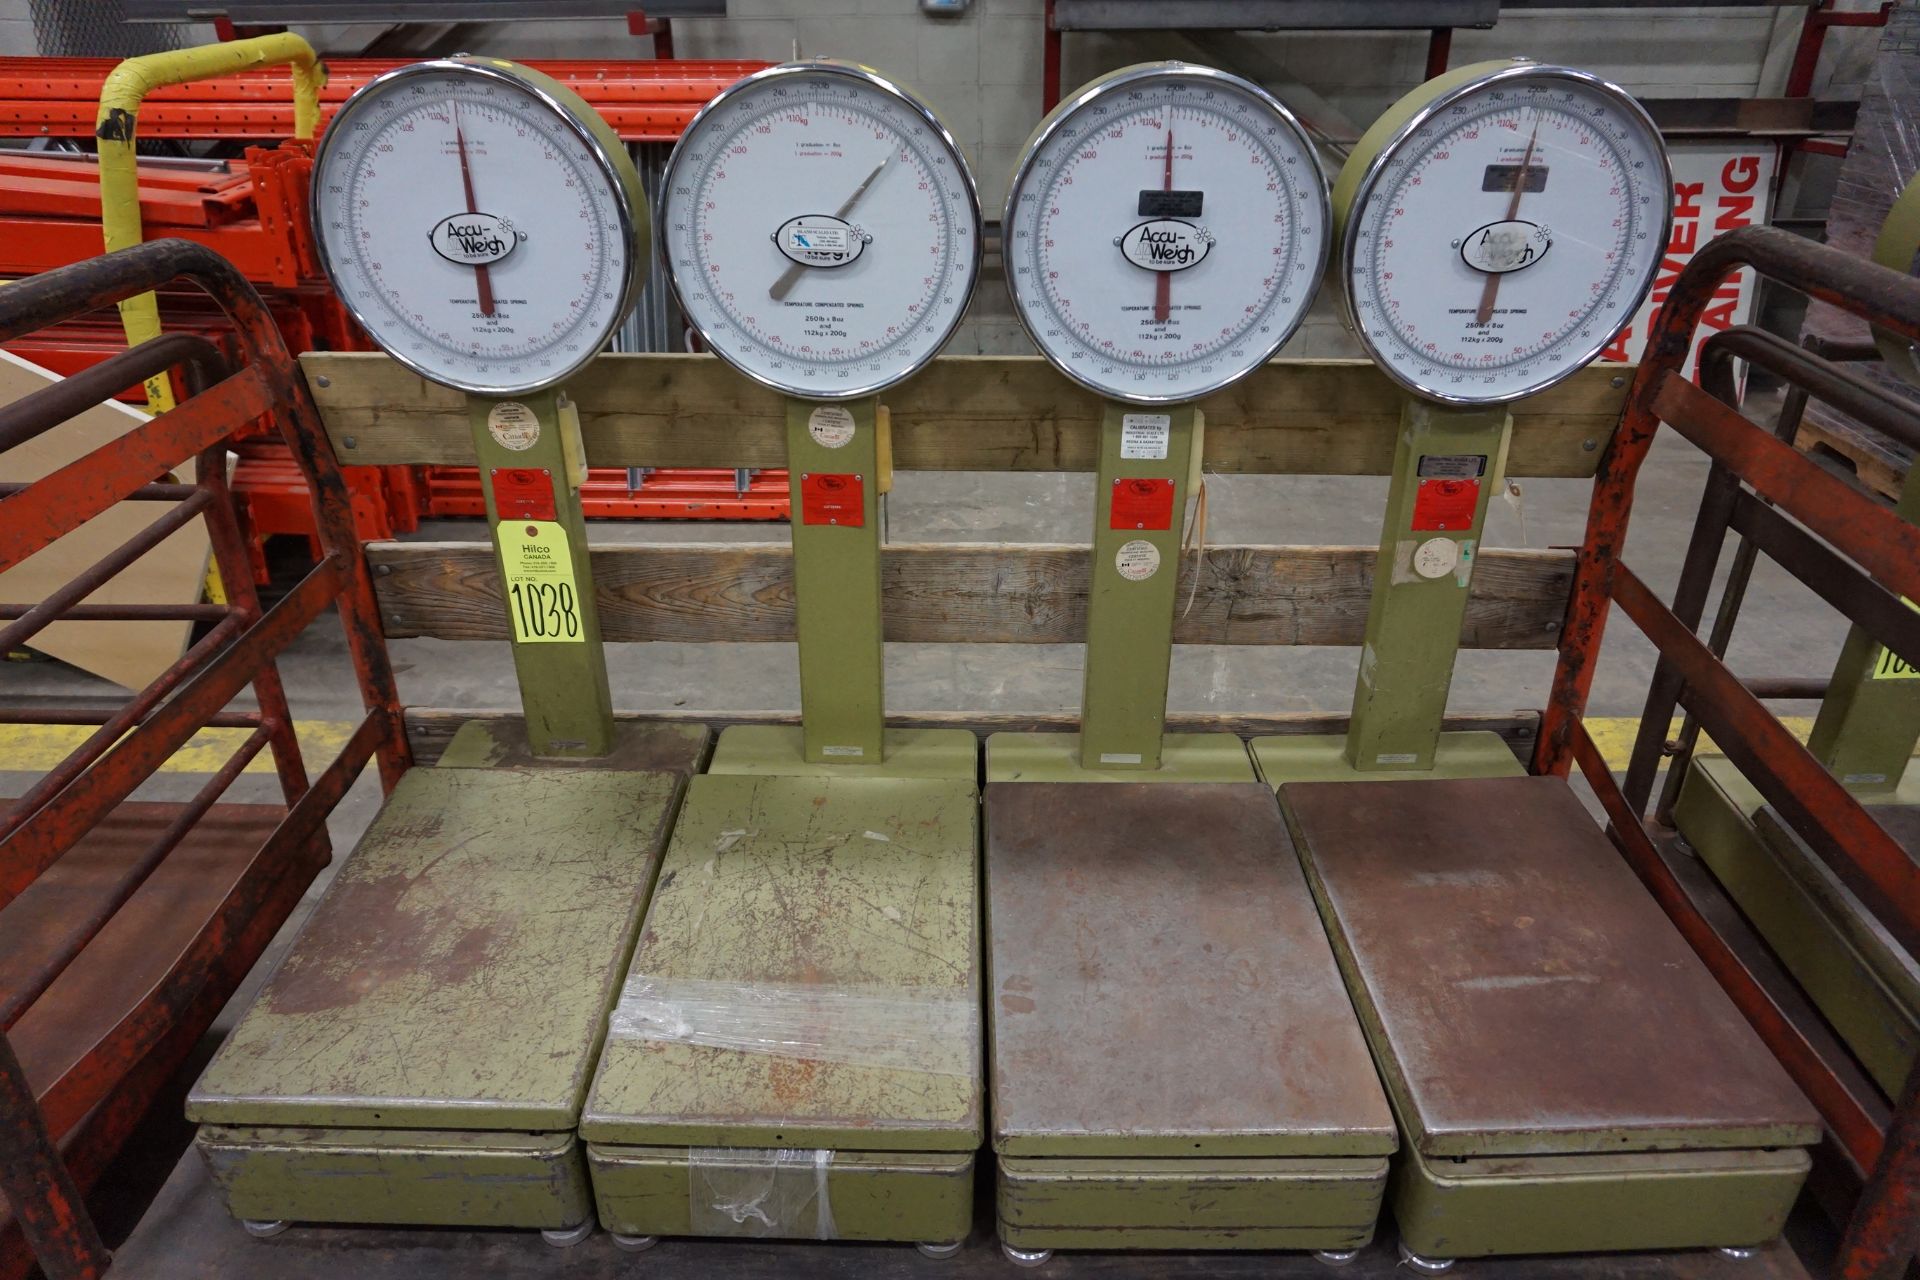 Accu-Weigh 250-Lbs Capacity Dial Scales